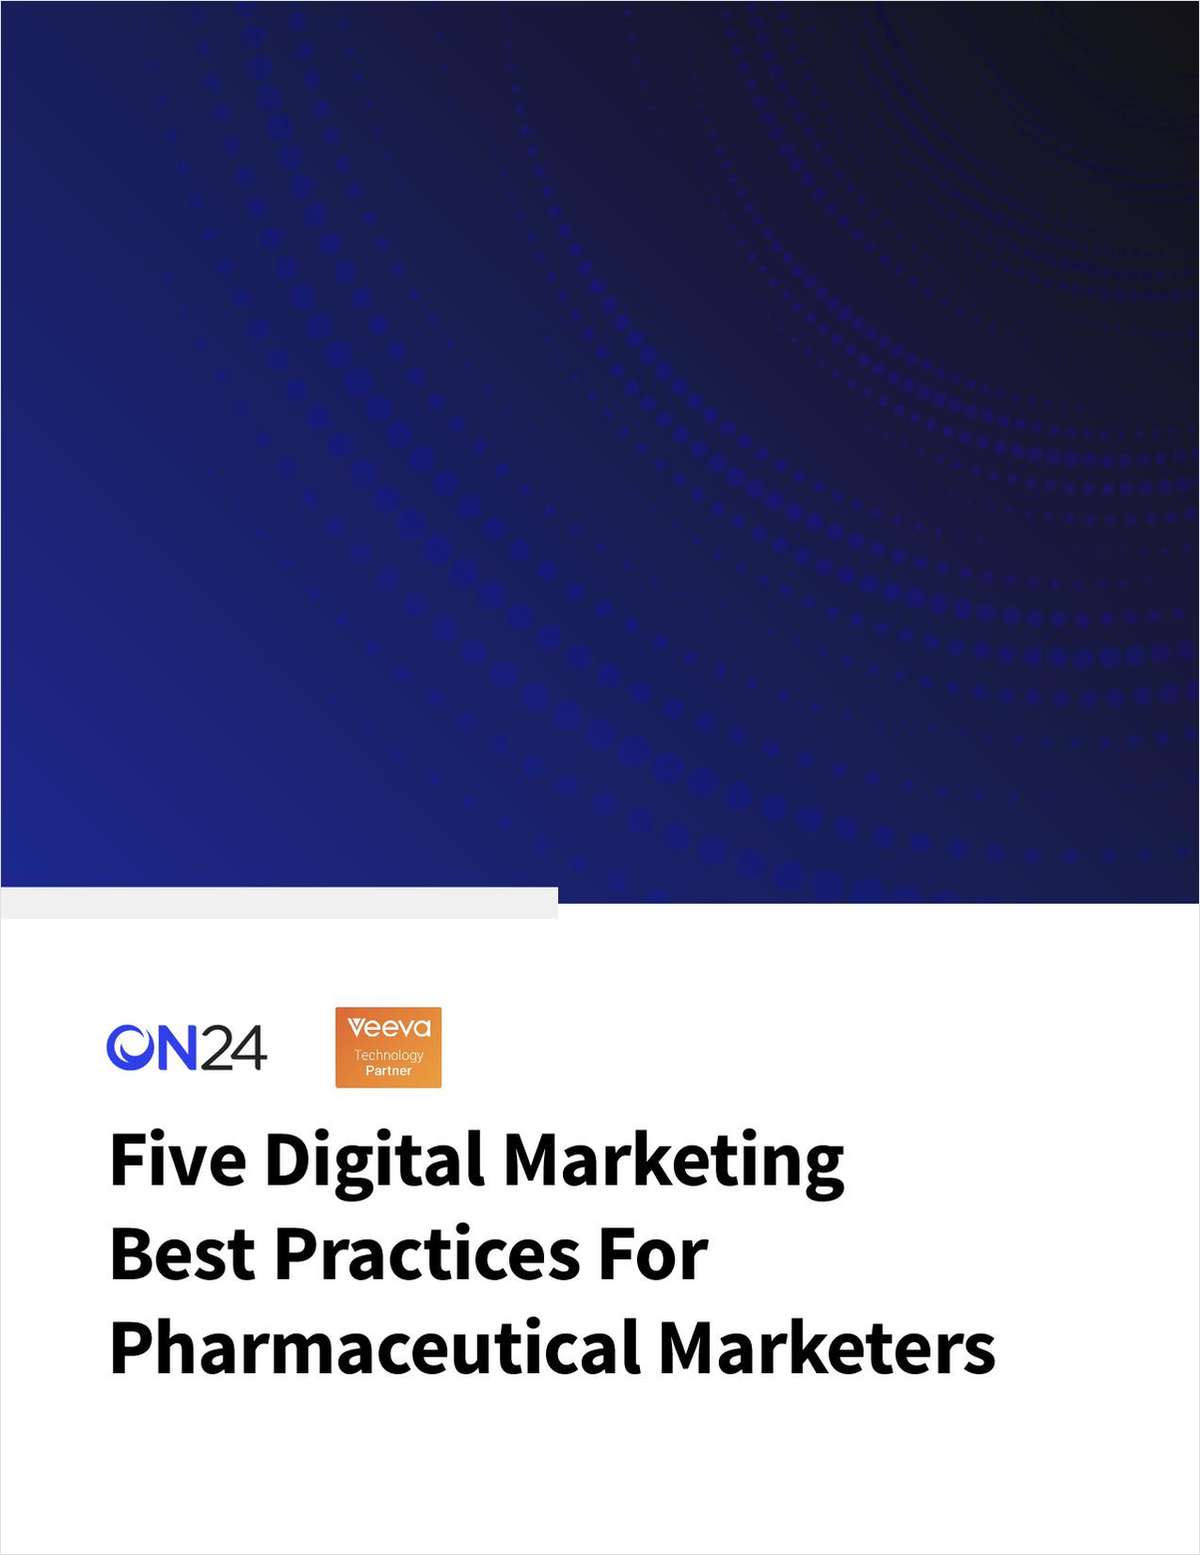 Five Digital Marketing Best Practices for Pharmaceutical Marketers